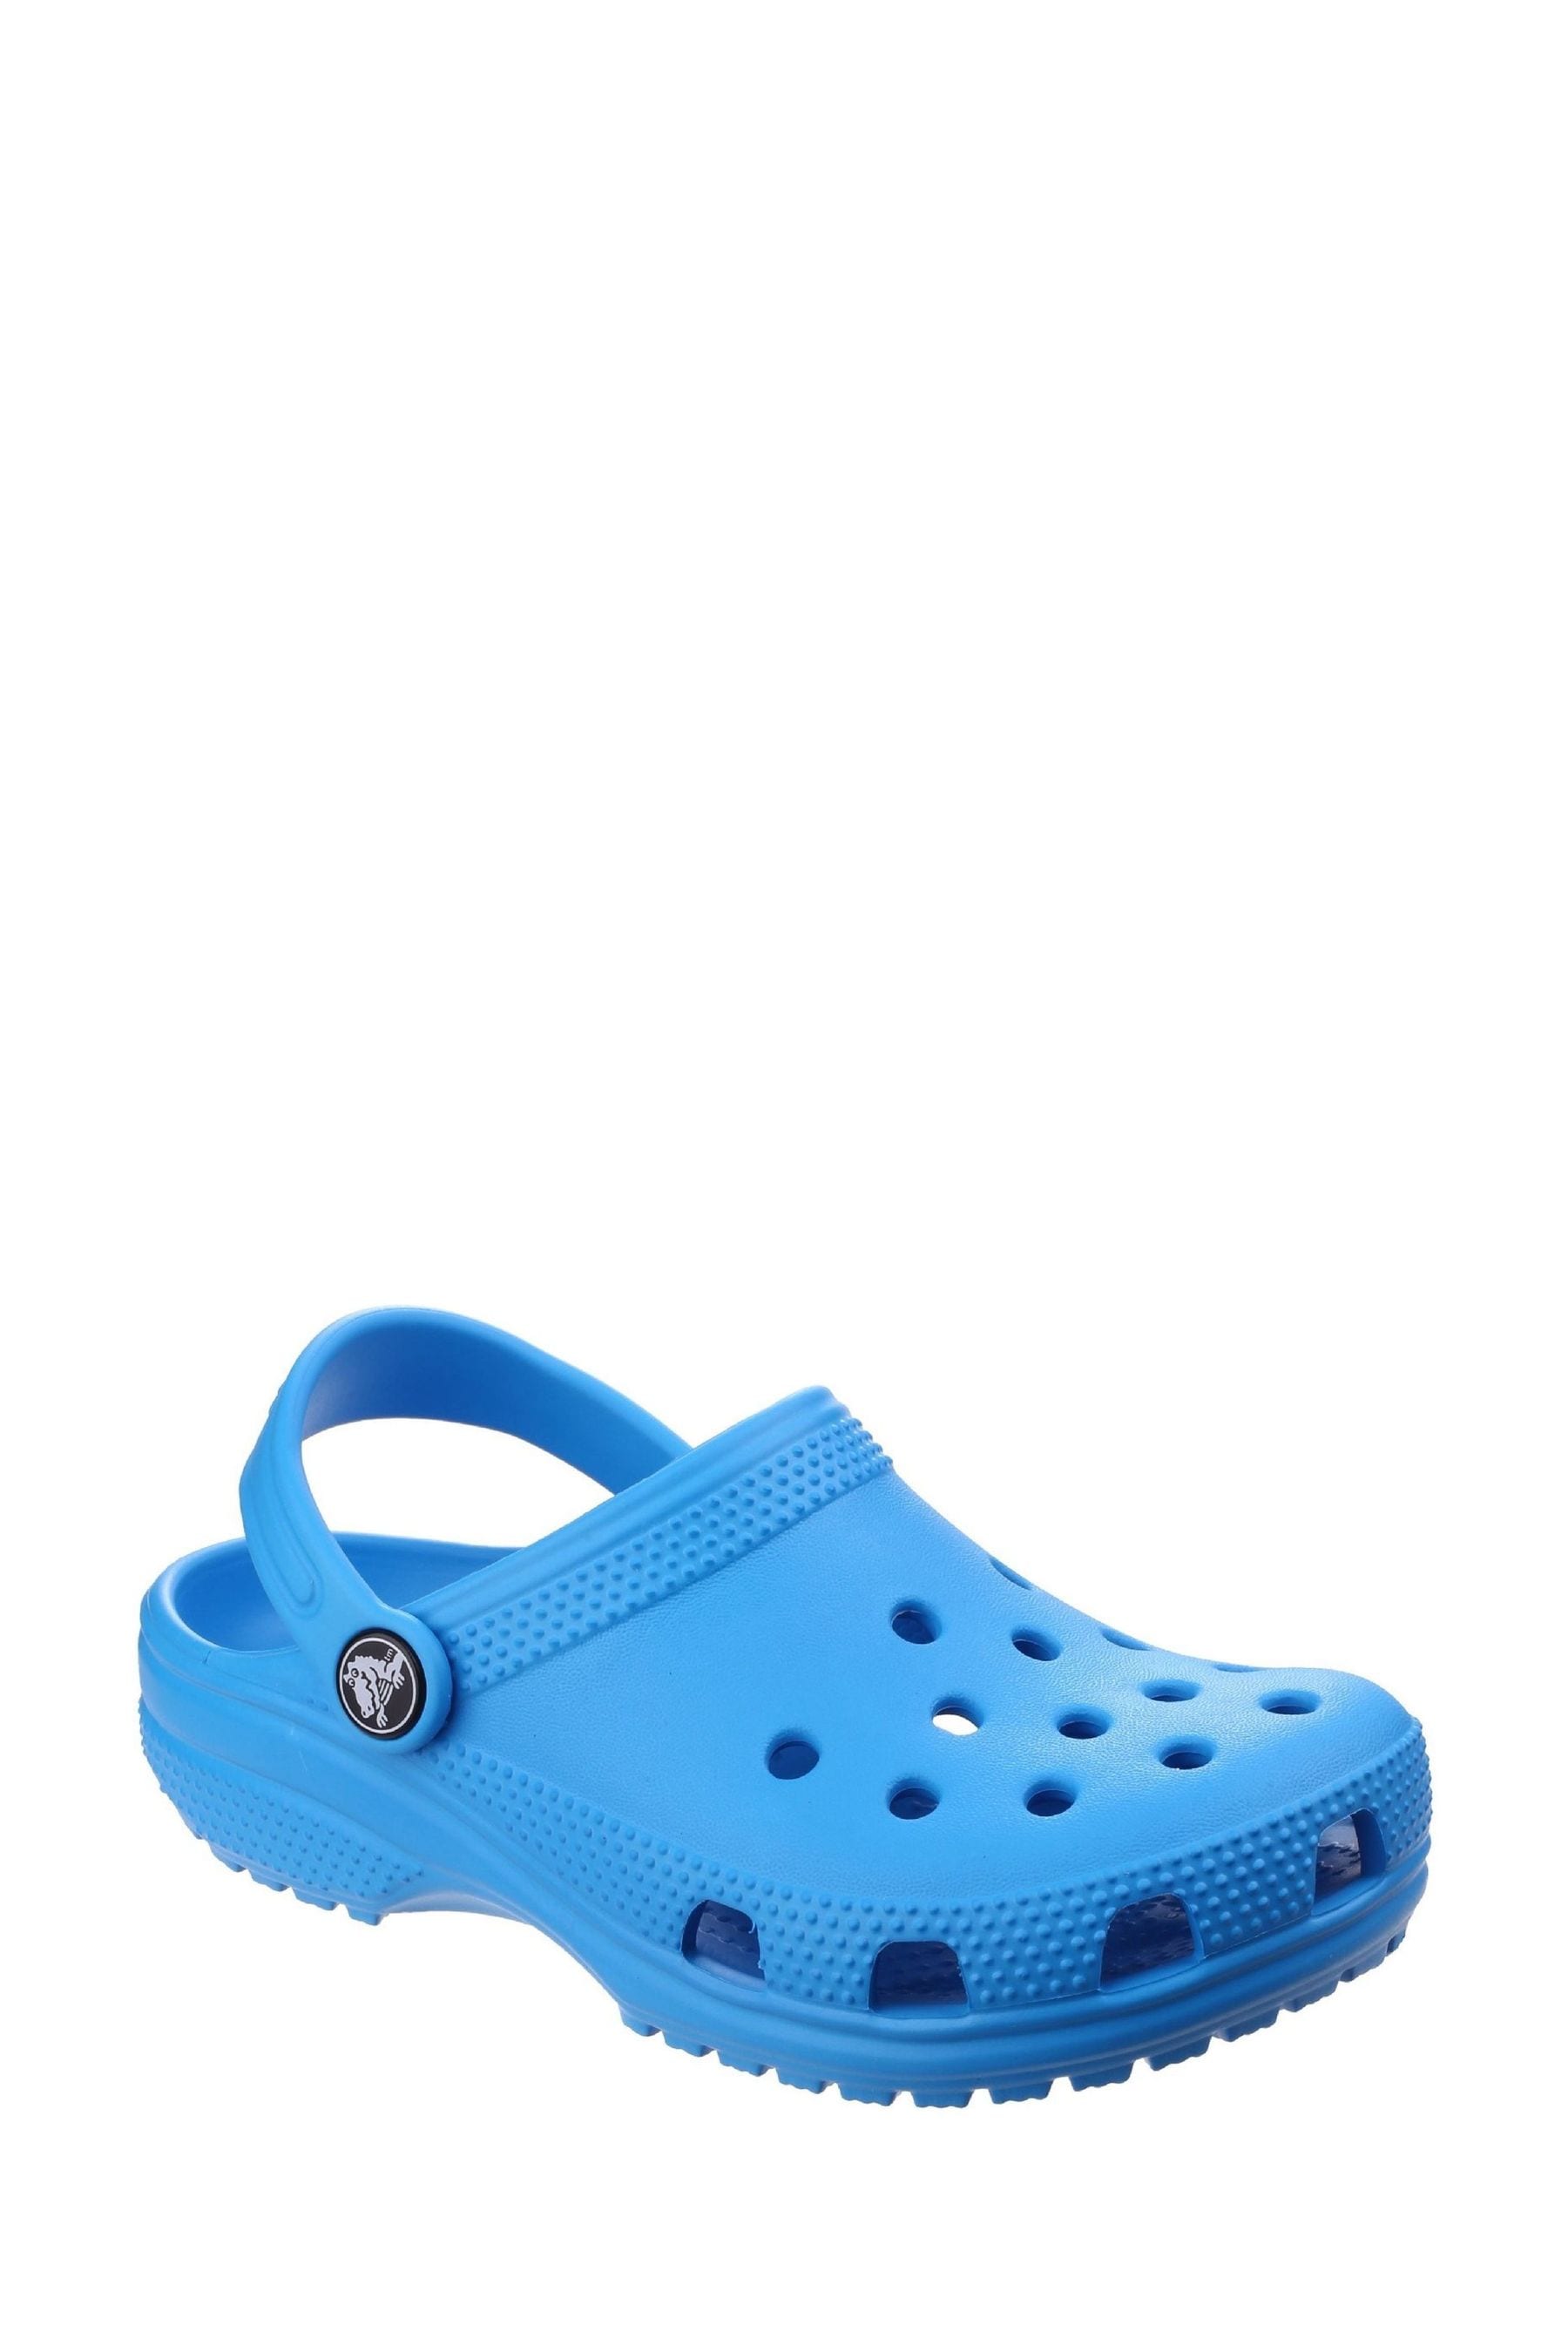 Buy Crocs™ Blue Kids Classic Slip-On Clogs from the Next UK online shop